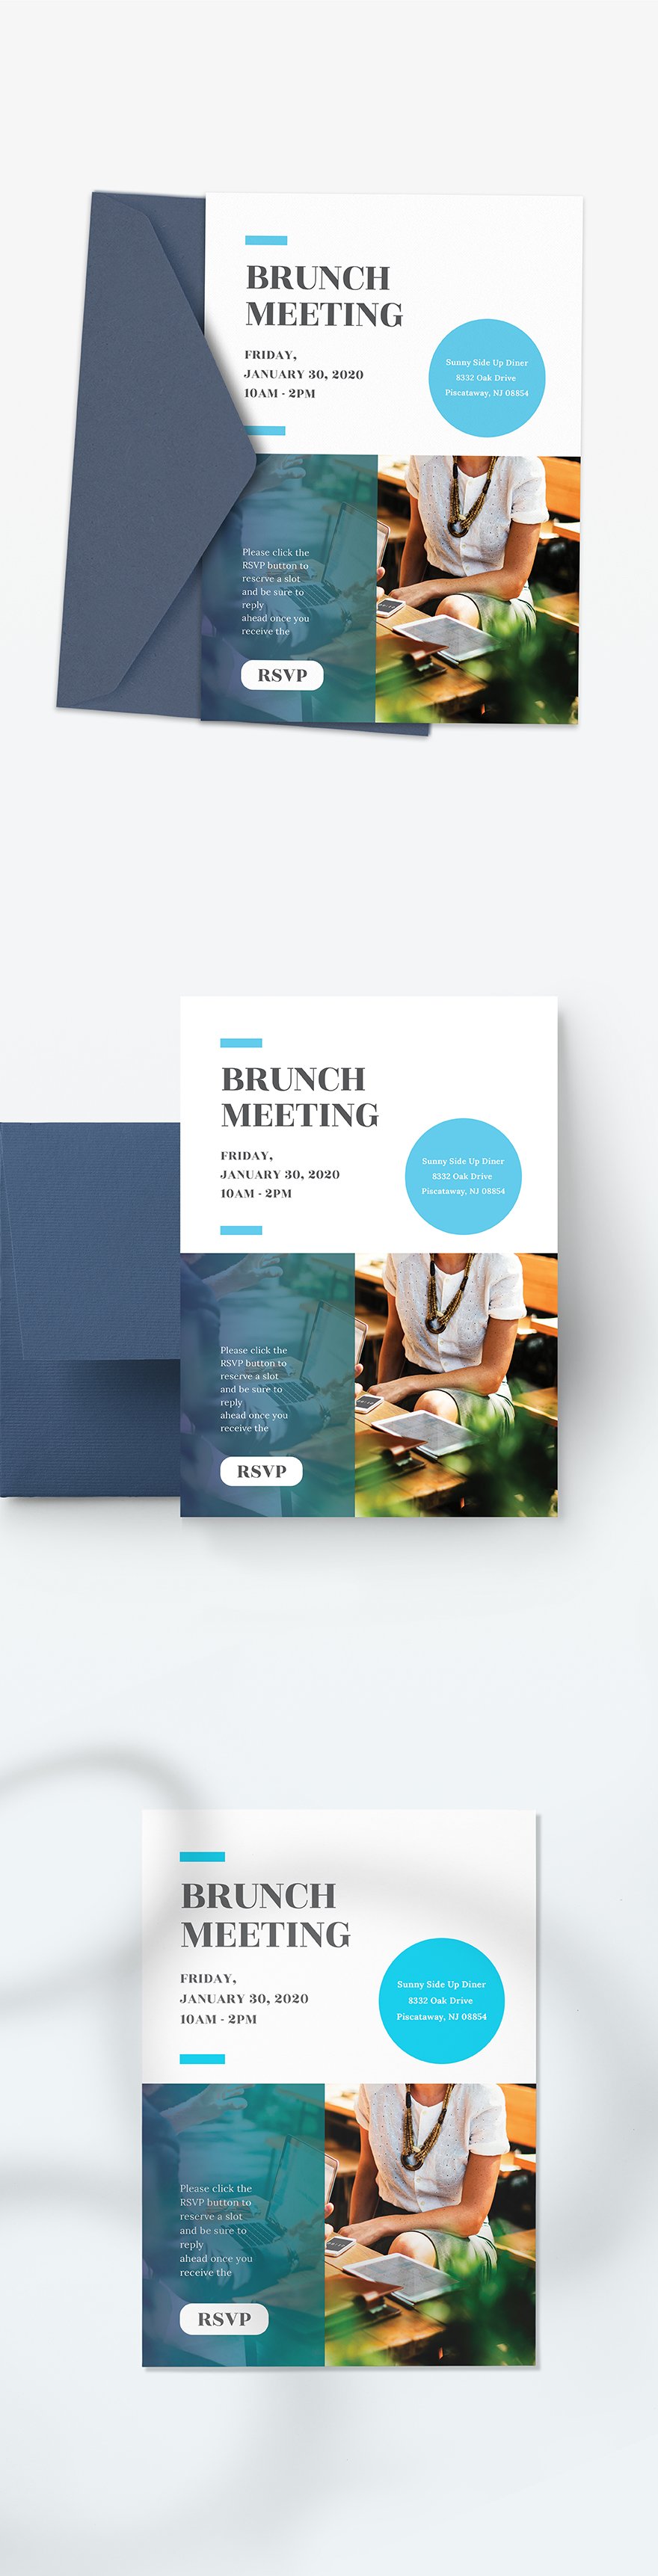 Business Email Invitation Template